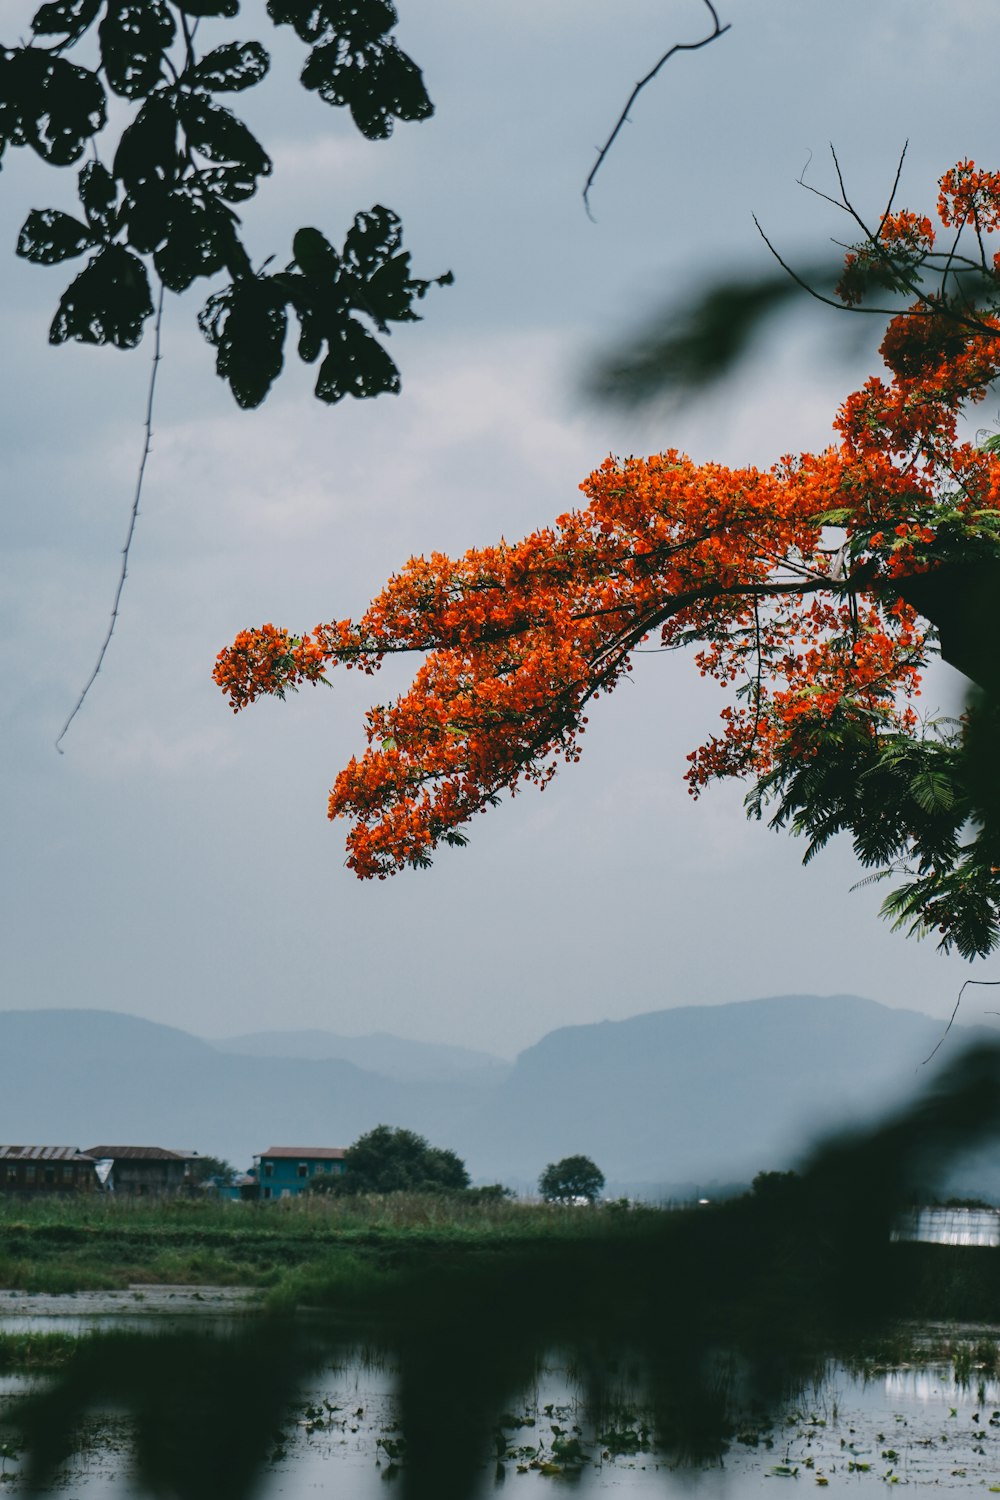 a tree with orange flowers in front of a body of water